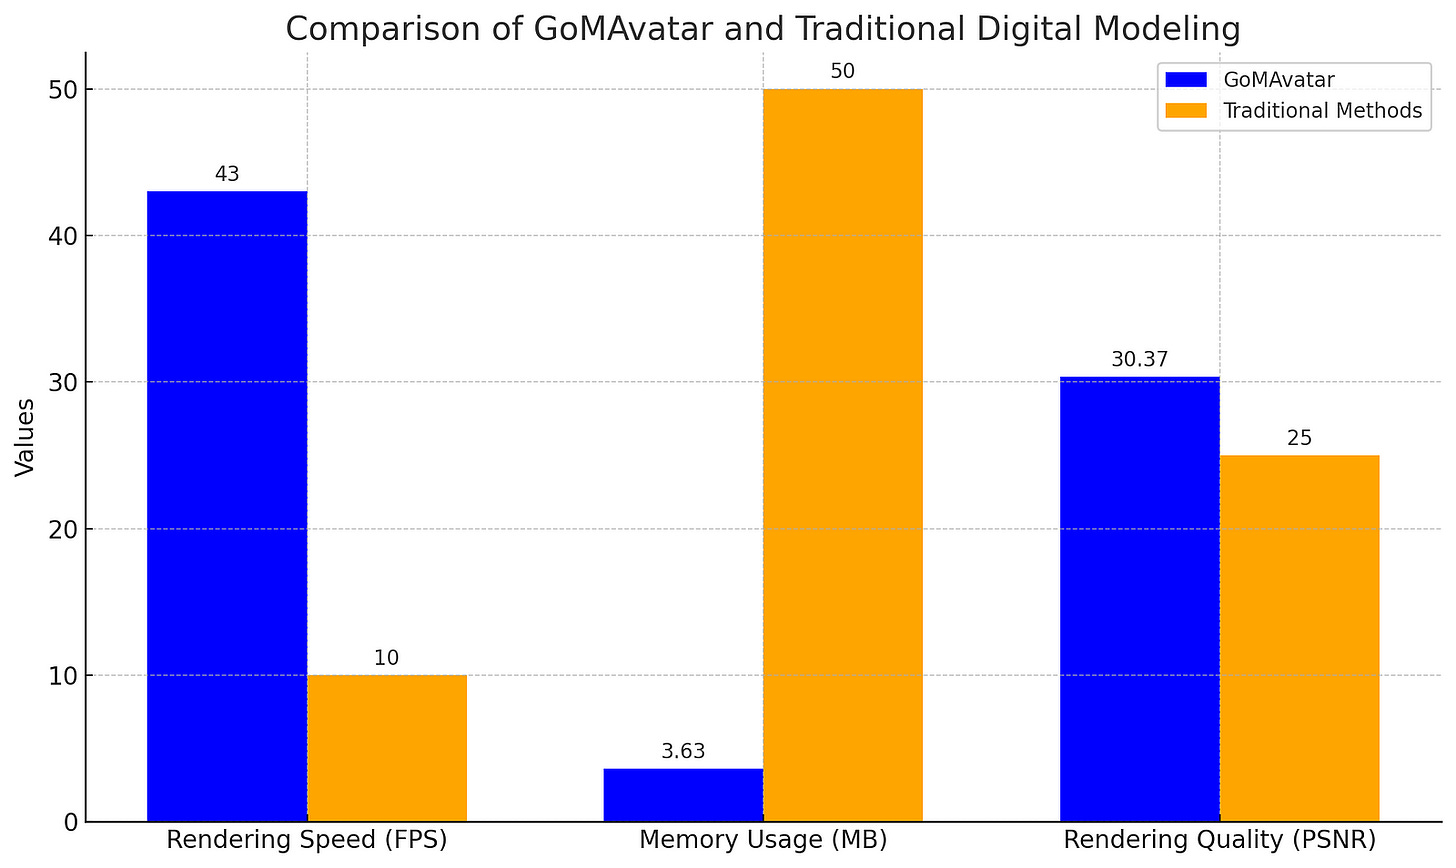 Bar chart showing the comparison between GoMAvatar and traditional digital modeling methods across three metrics: rendering speed in frames per second, memory usage in megabytes, and rendering quality measured by Peak Signal-to-Noise Ratio (PSNR). GoMAvatar outperforms traditional methods in all categories, with higher FPS, lower memory usage, and better quality.